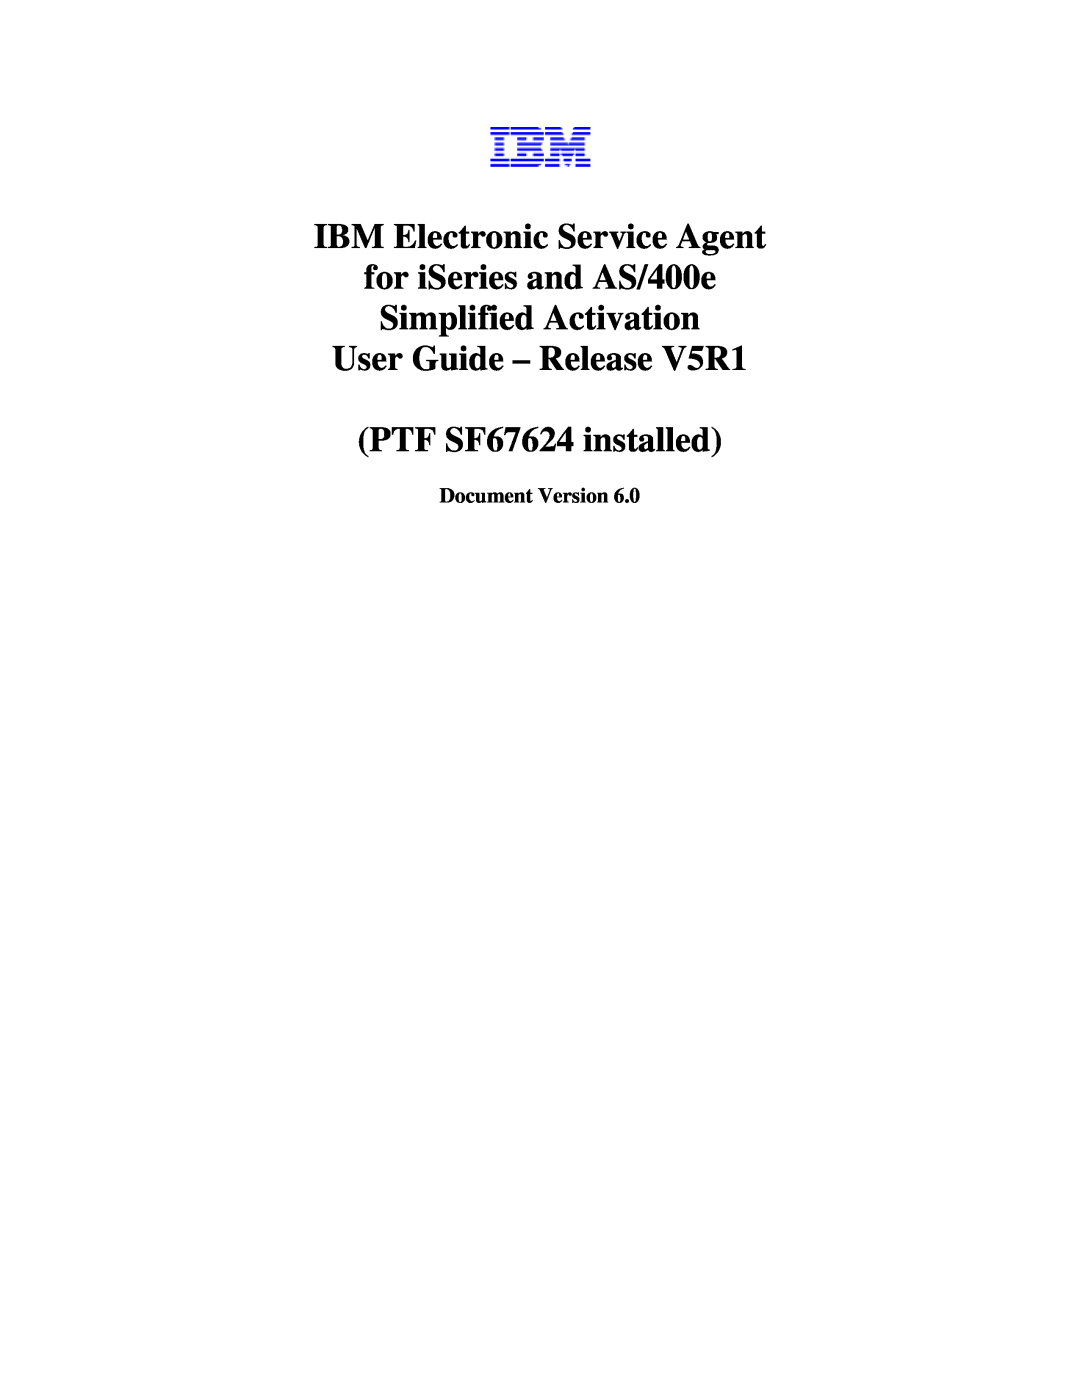 IBM V5R1, PTF SF67624 manual IBM Electronic Service Agent, for iSeries and AS/400e Simplified Activation, Document Version 